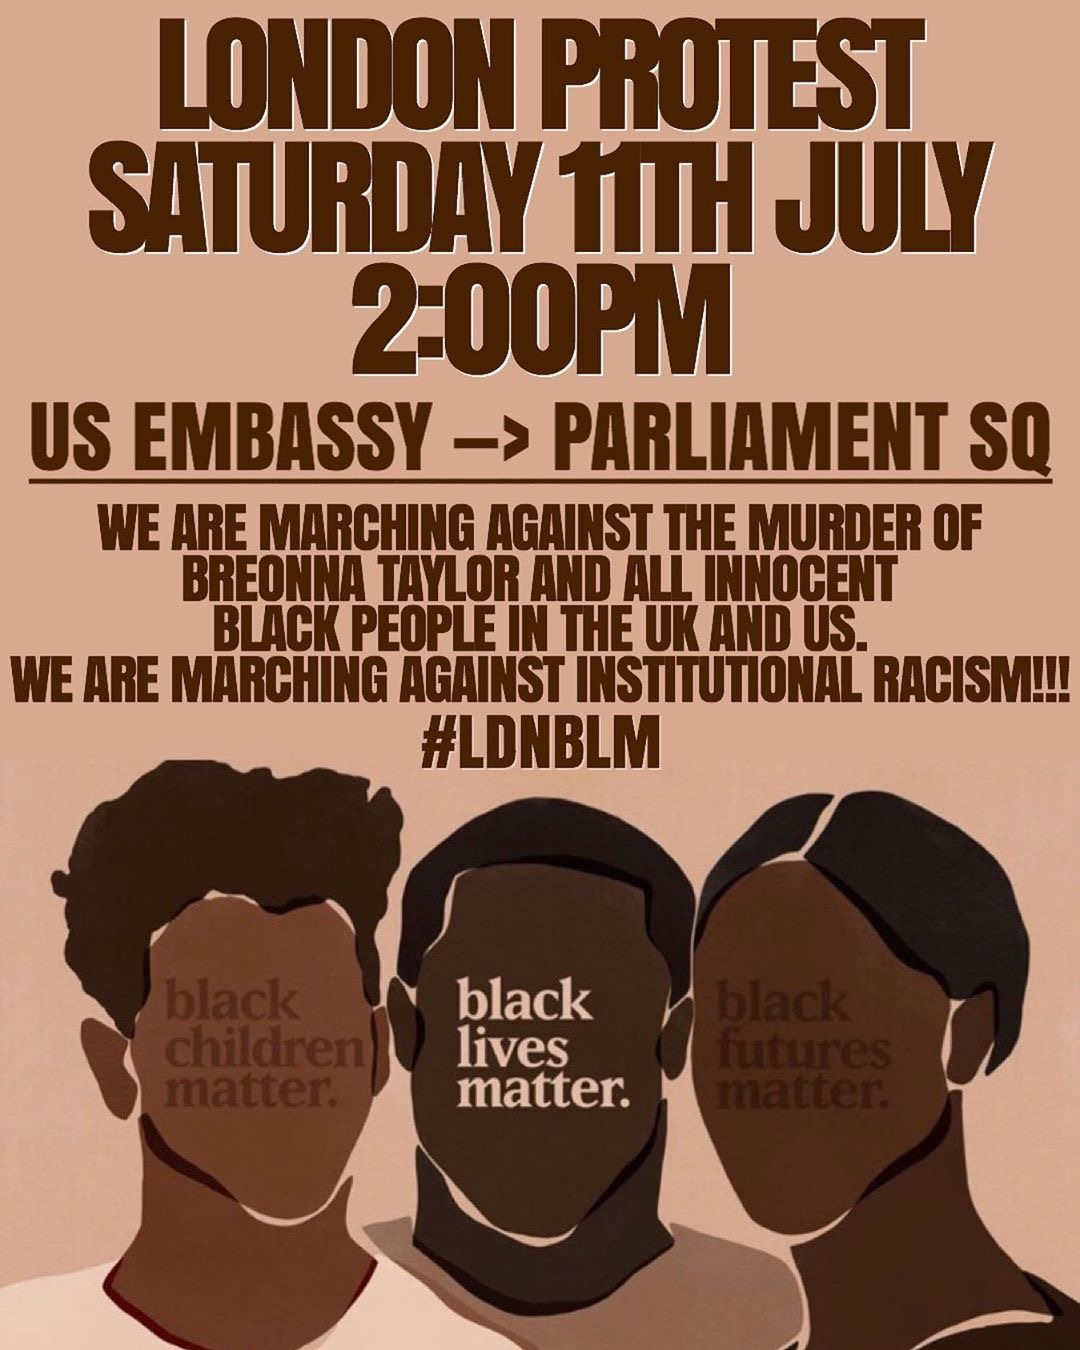 BLM London protest for Breonna Taylor and all the dead in the US and UK – 11th July US embassy